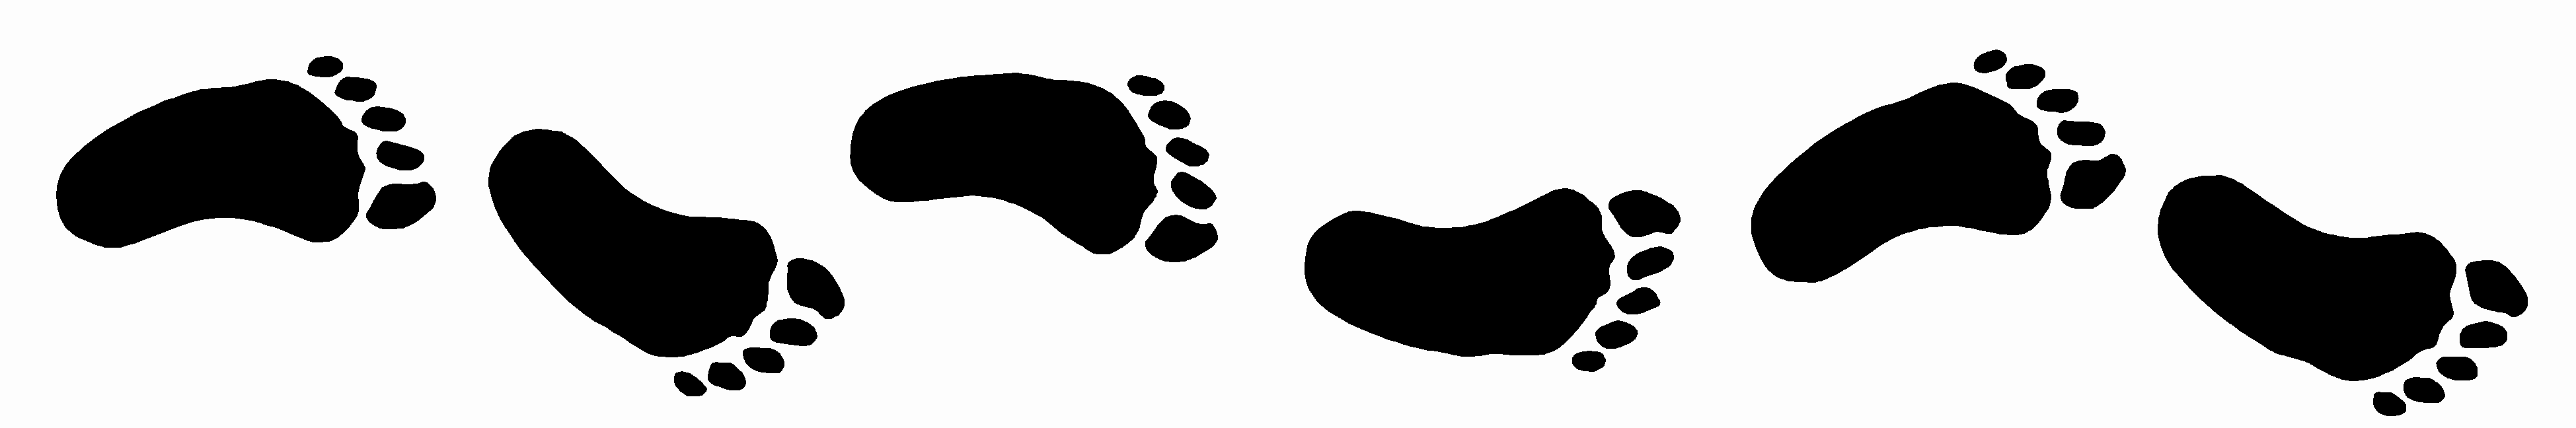 Free Animated Footsteps Cliparts, Download Free Animated Footsteps